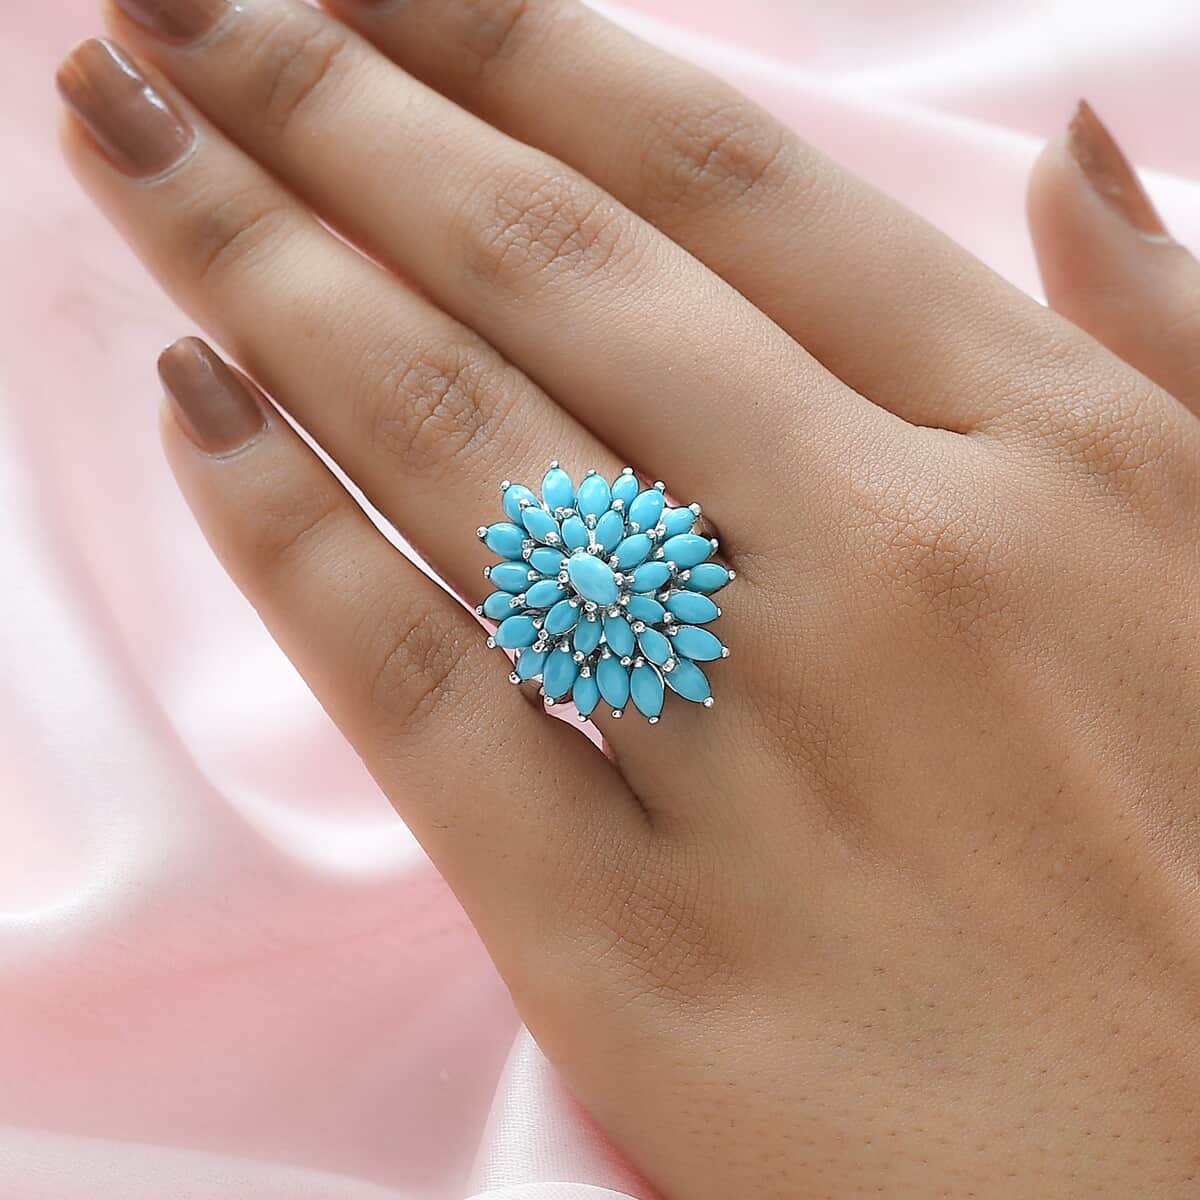 doorbuster-american-natural-sleeping-beauty-turquoise-floral-spray-ring-in-platinum-over-sterling-silver-size-10.0-3.75-ctw image number 2